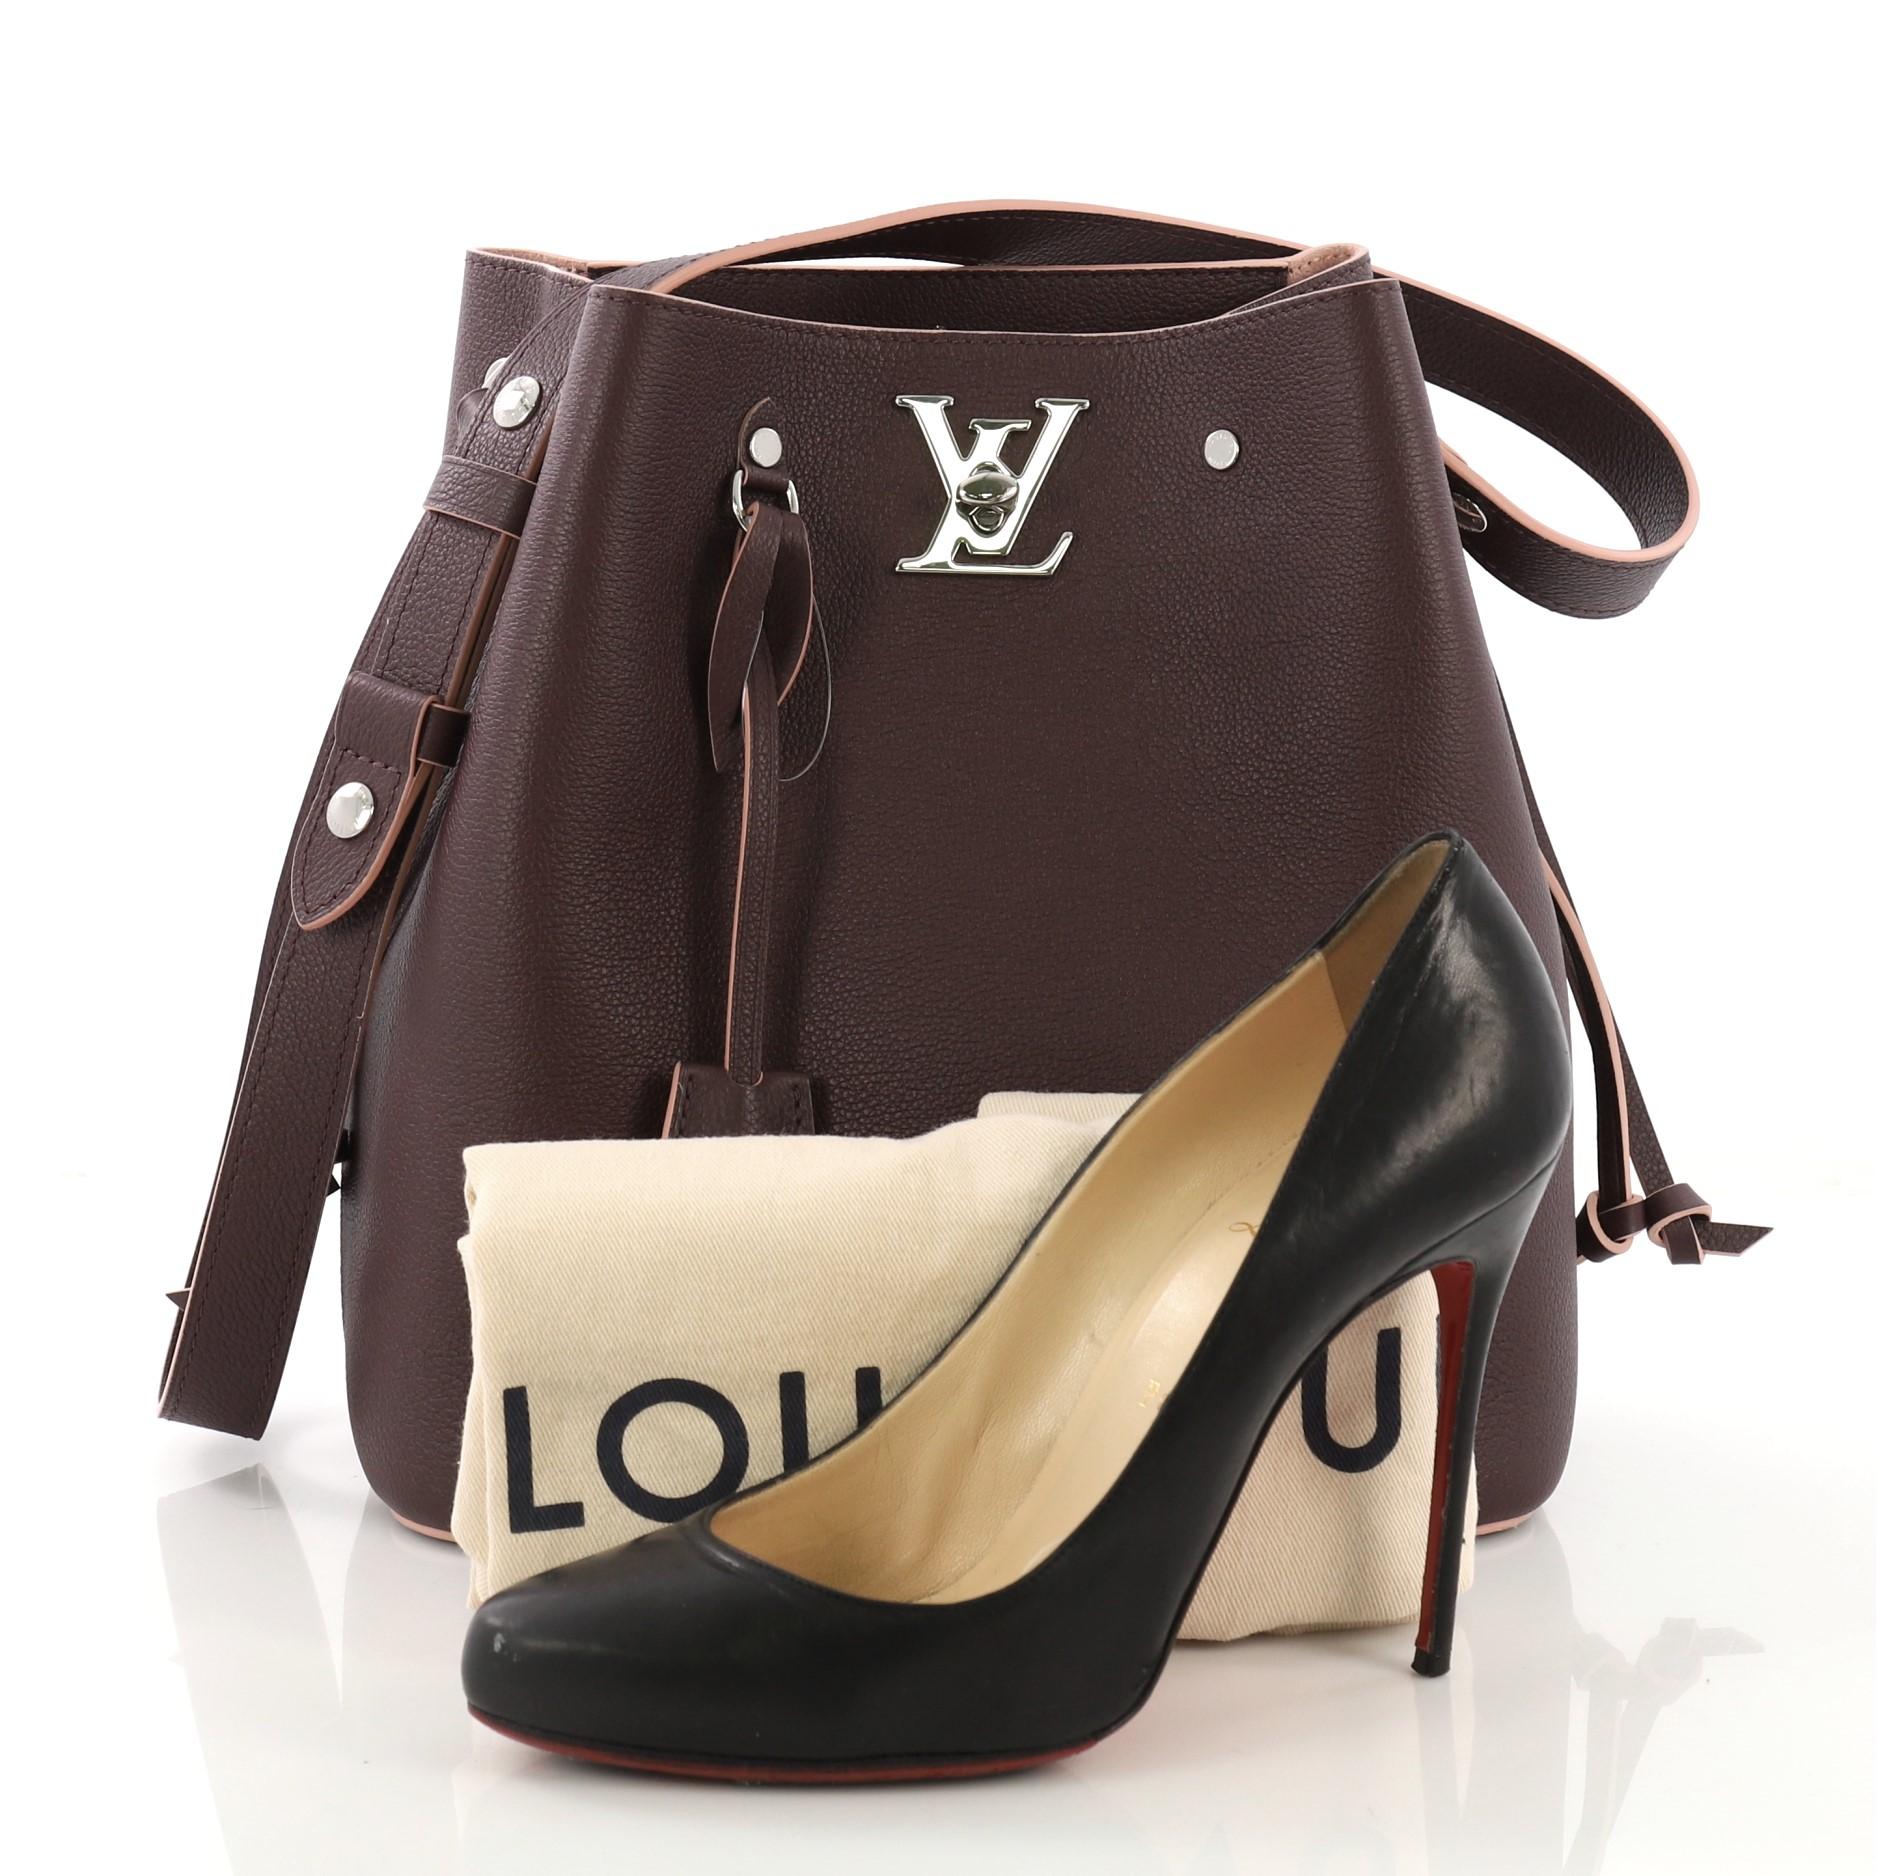 This Louis Vuitton Lockme Bucket Bag Leather, crafted in burgundy leather, features a leather shoulder strap, leather thread that cinches the bag, and gunmetal-tone hardware. Its LV turn-lock closure opens to a light pink microfiber interior with